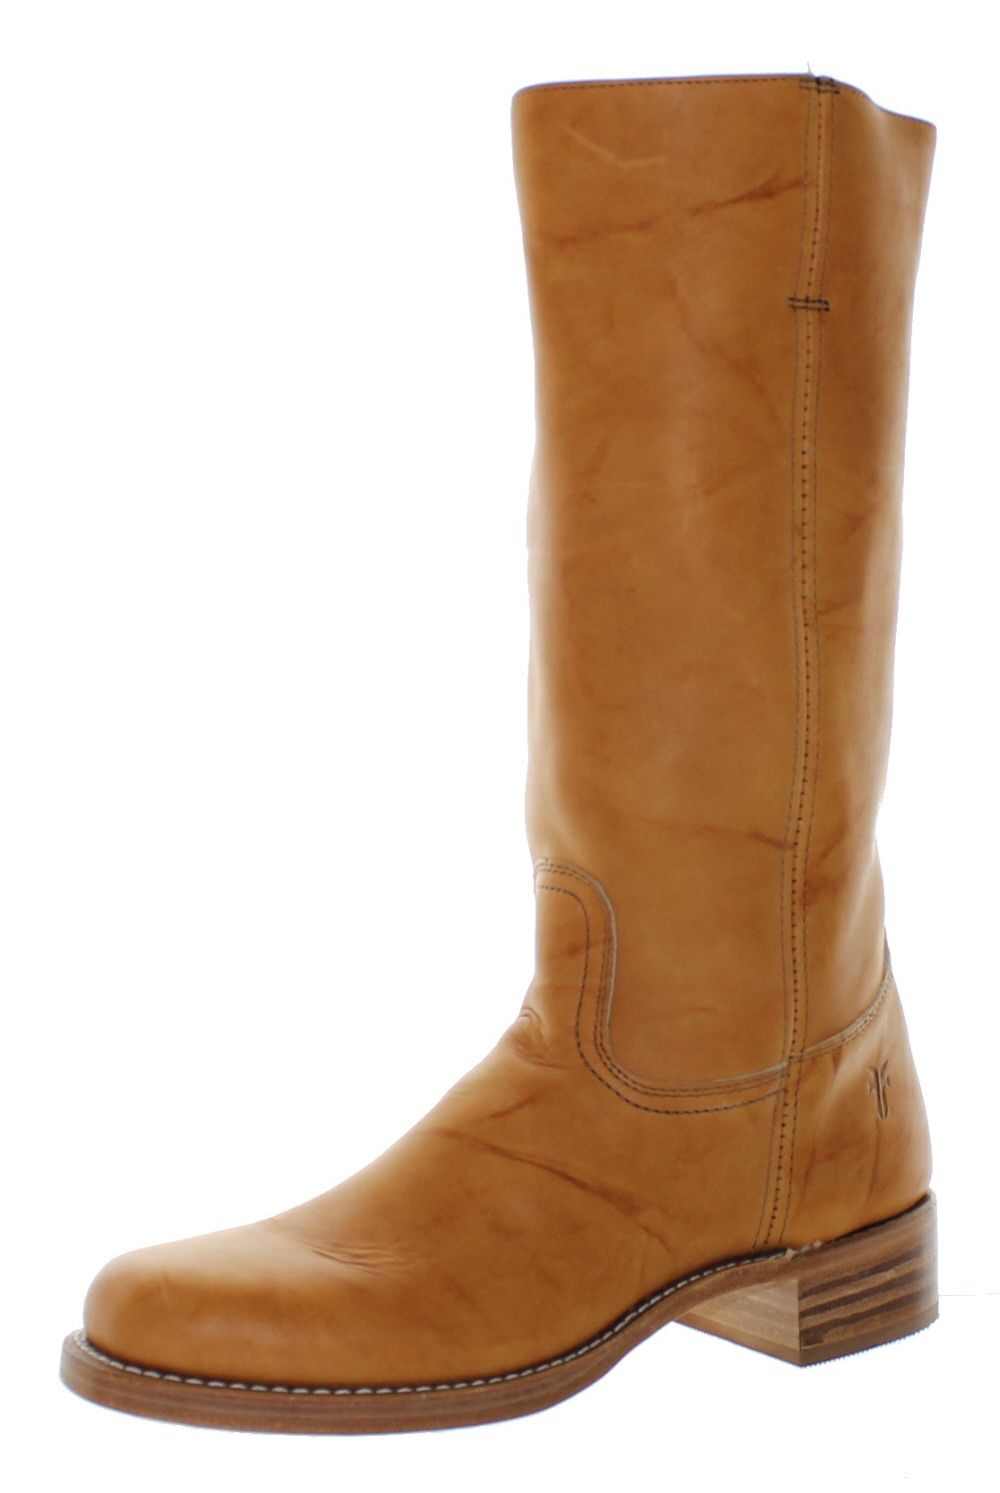 Frye Mens Campus 14L #87290-1 Leather Pull On Riding Boots Tan Size 8.5 ...